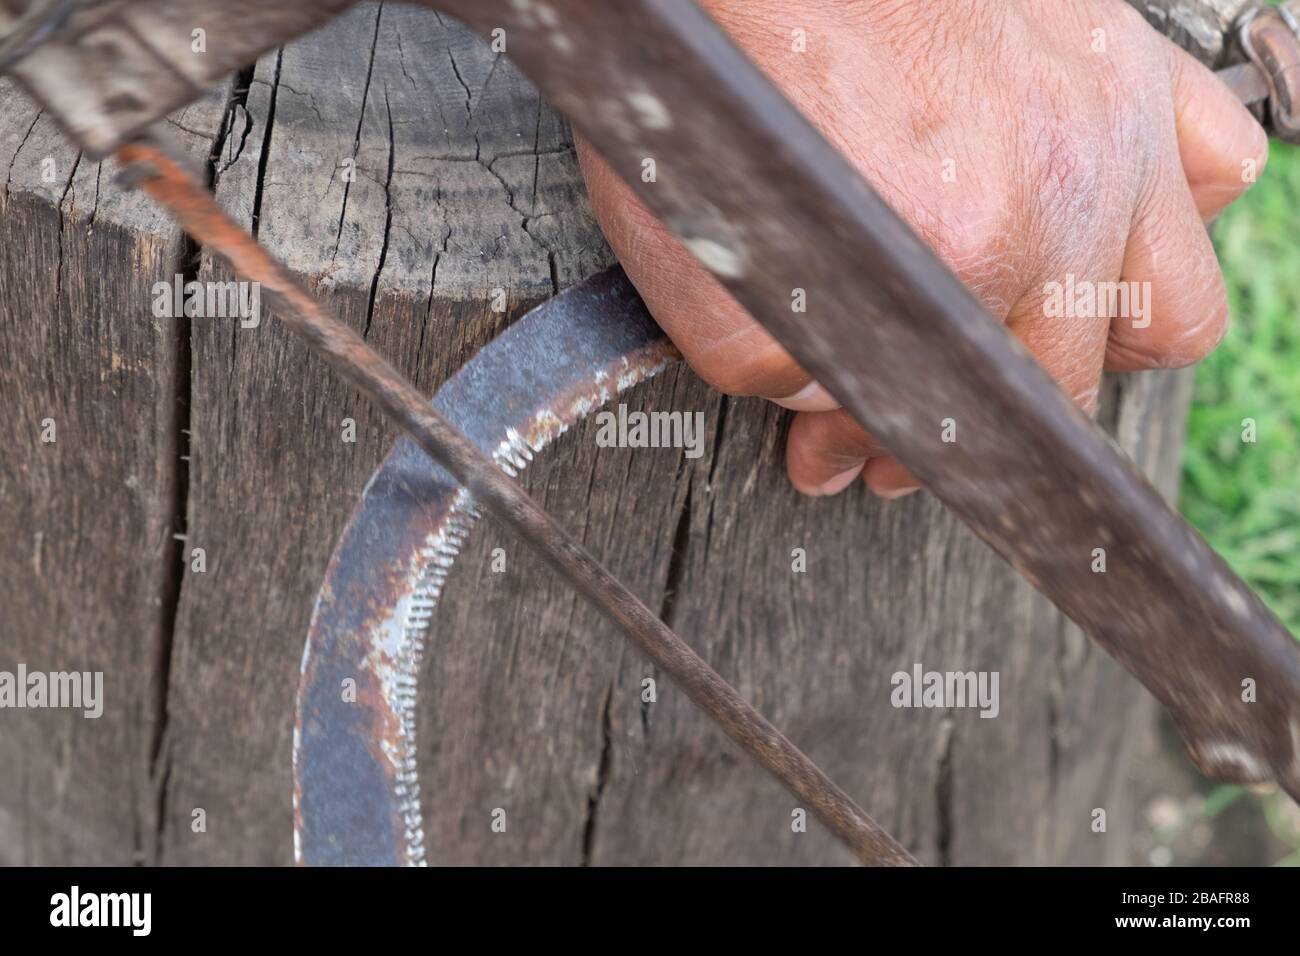 Coronavirus prevents buying new sickle so add teeth with a hacksaw replacing worn out teeth Stock Photo